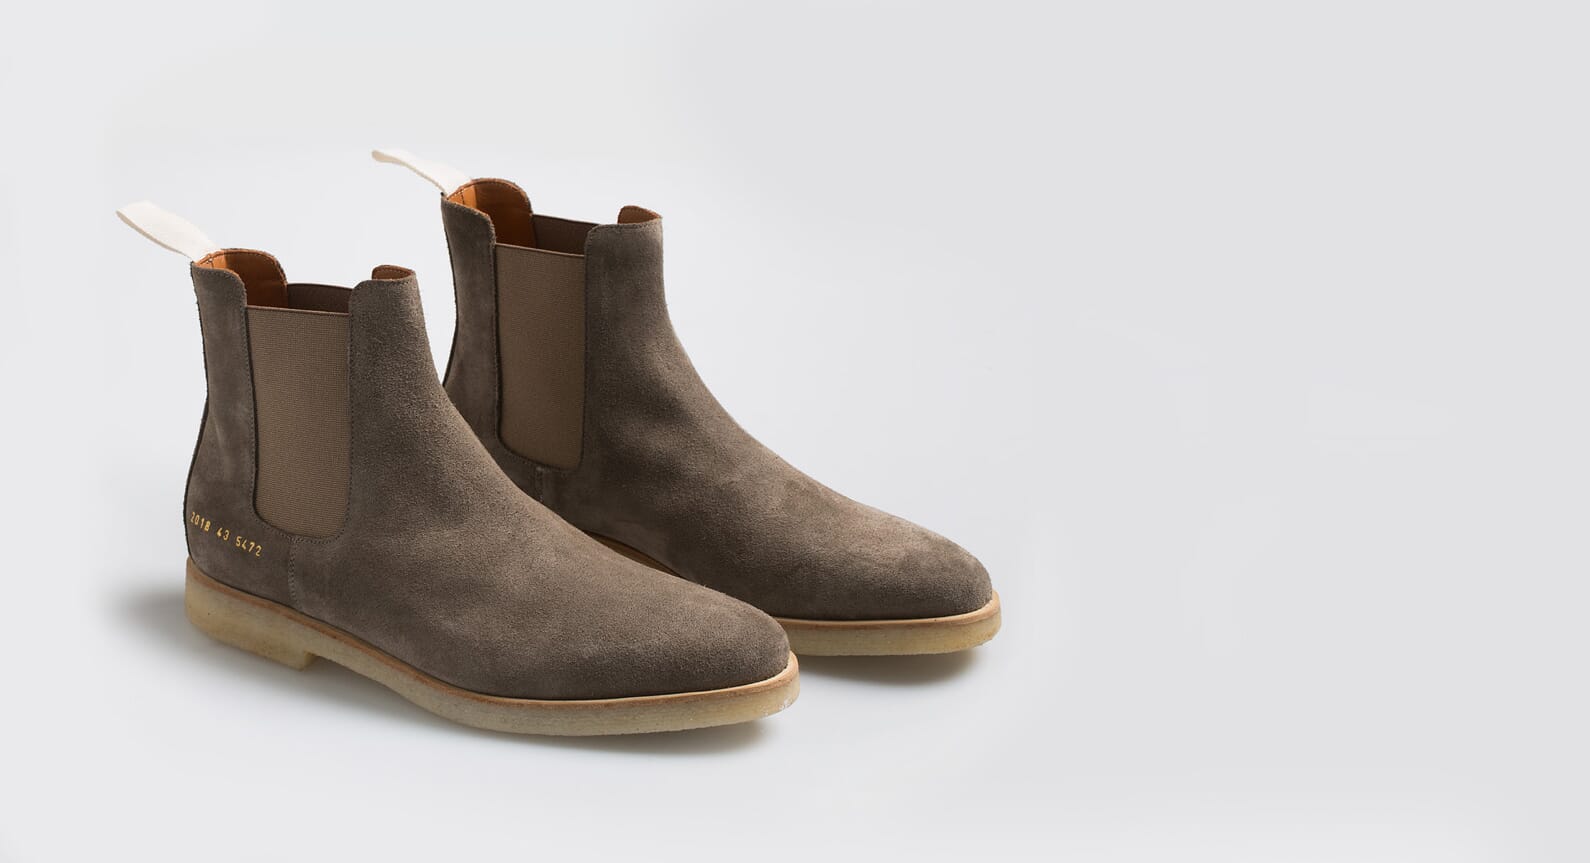 mens chelsea boots common projects